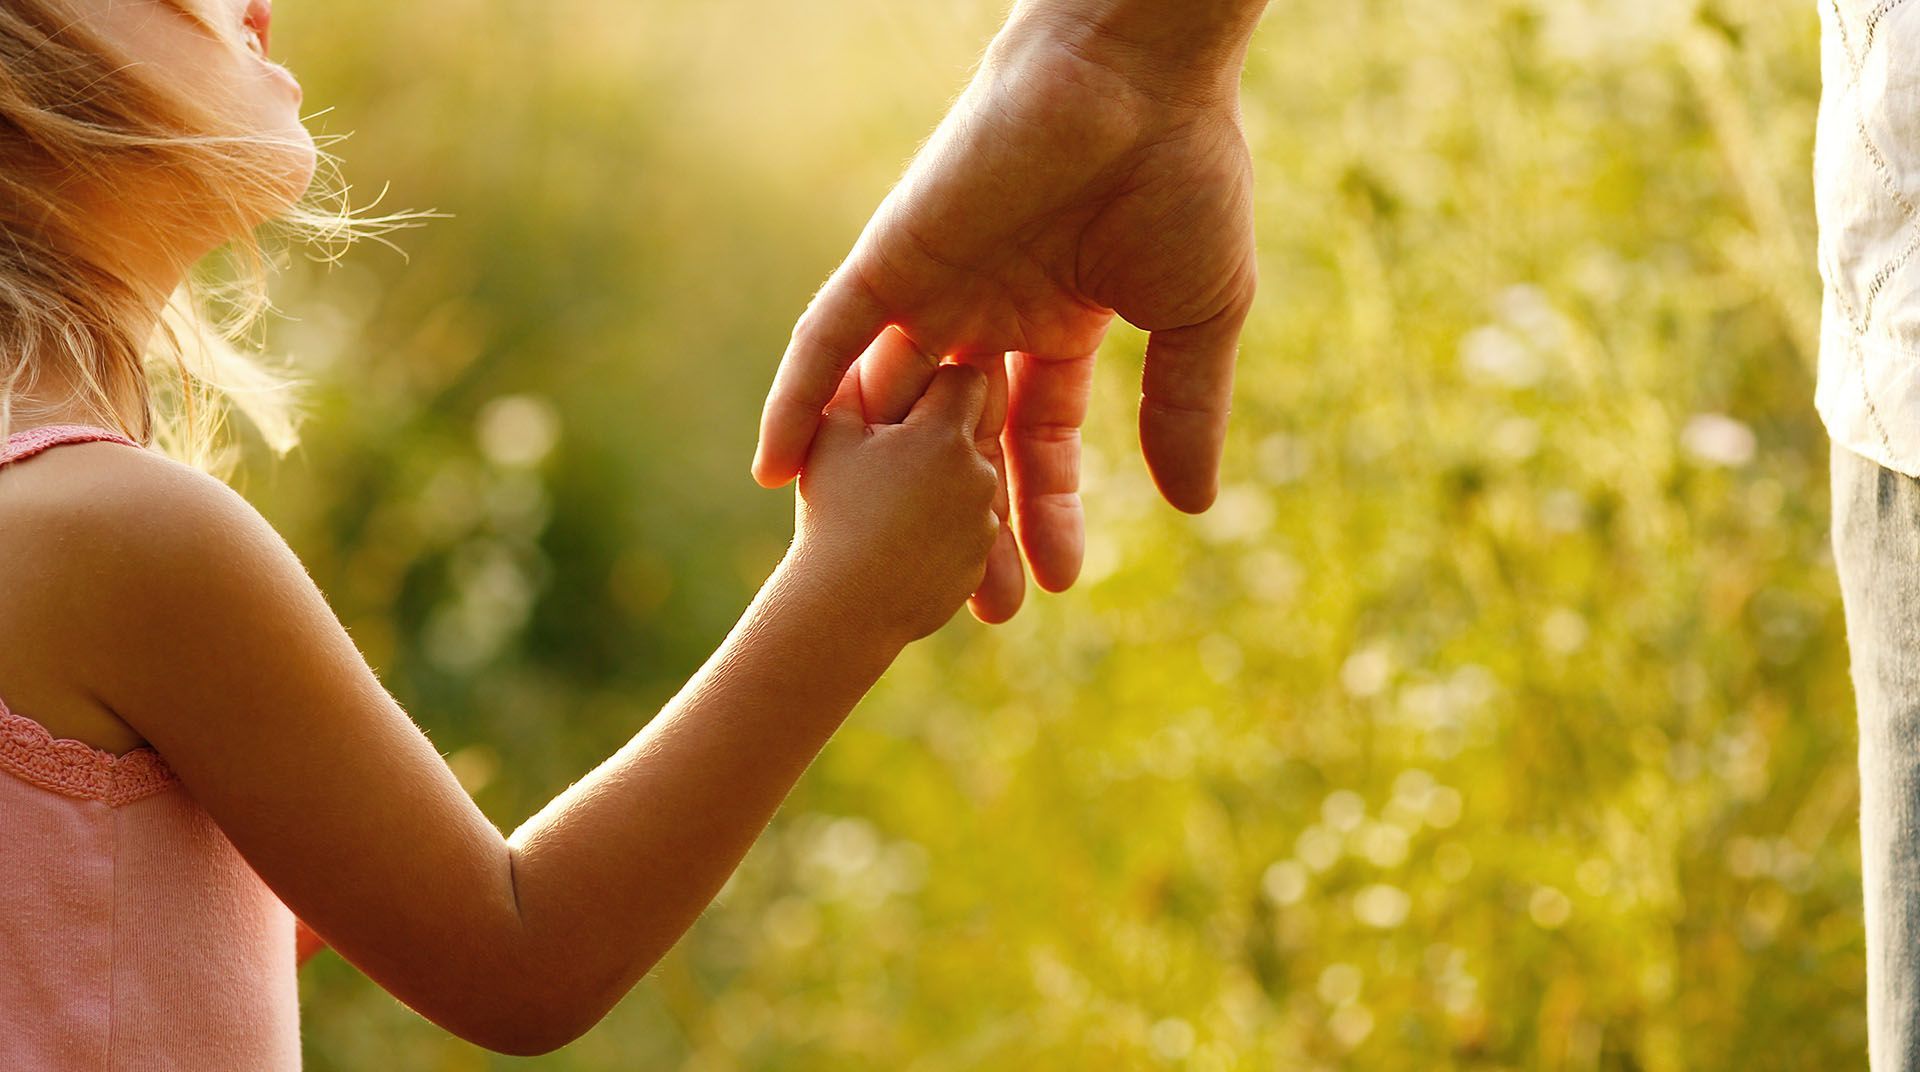 How to Help a Grieving Child